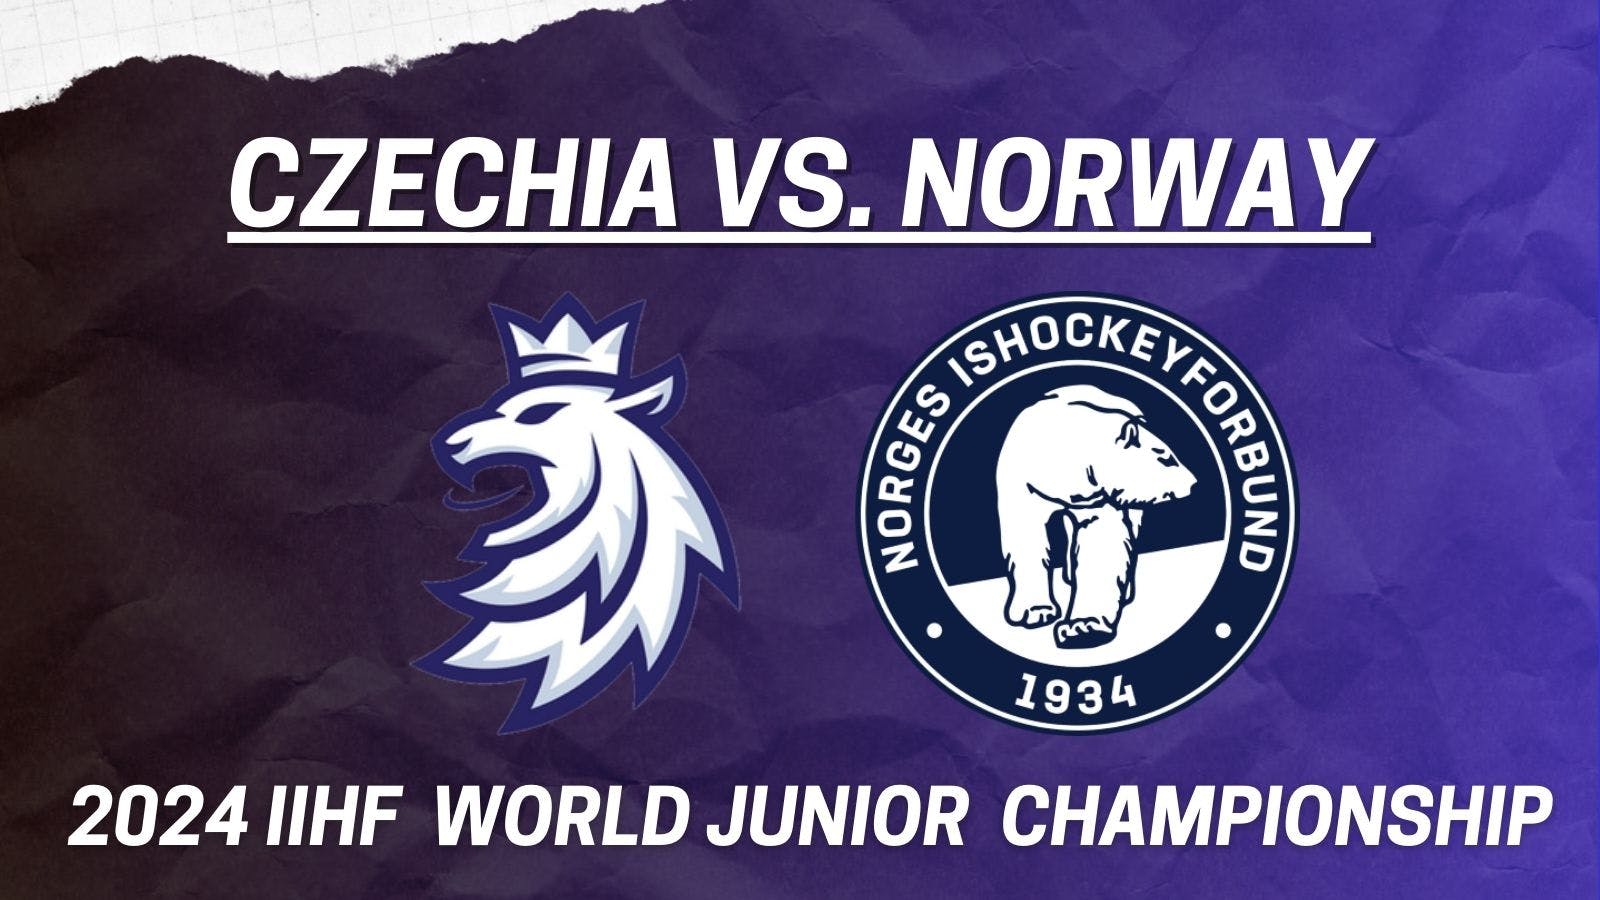 Top standouts from Czechia vs. Norway at 2024 World Junior Championship